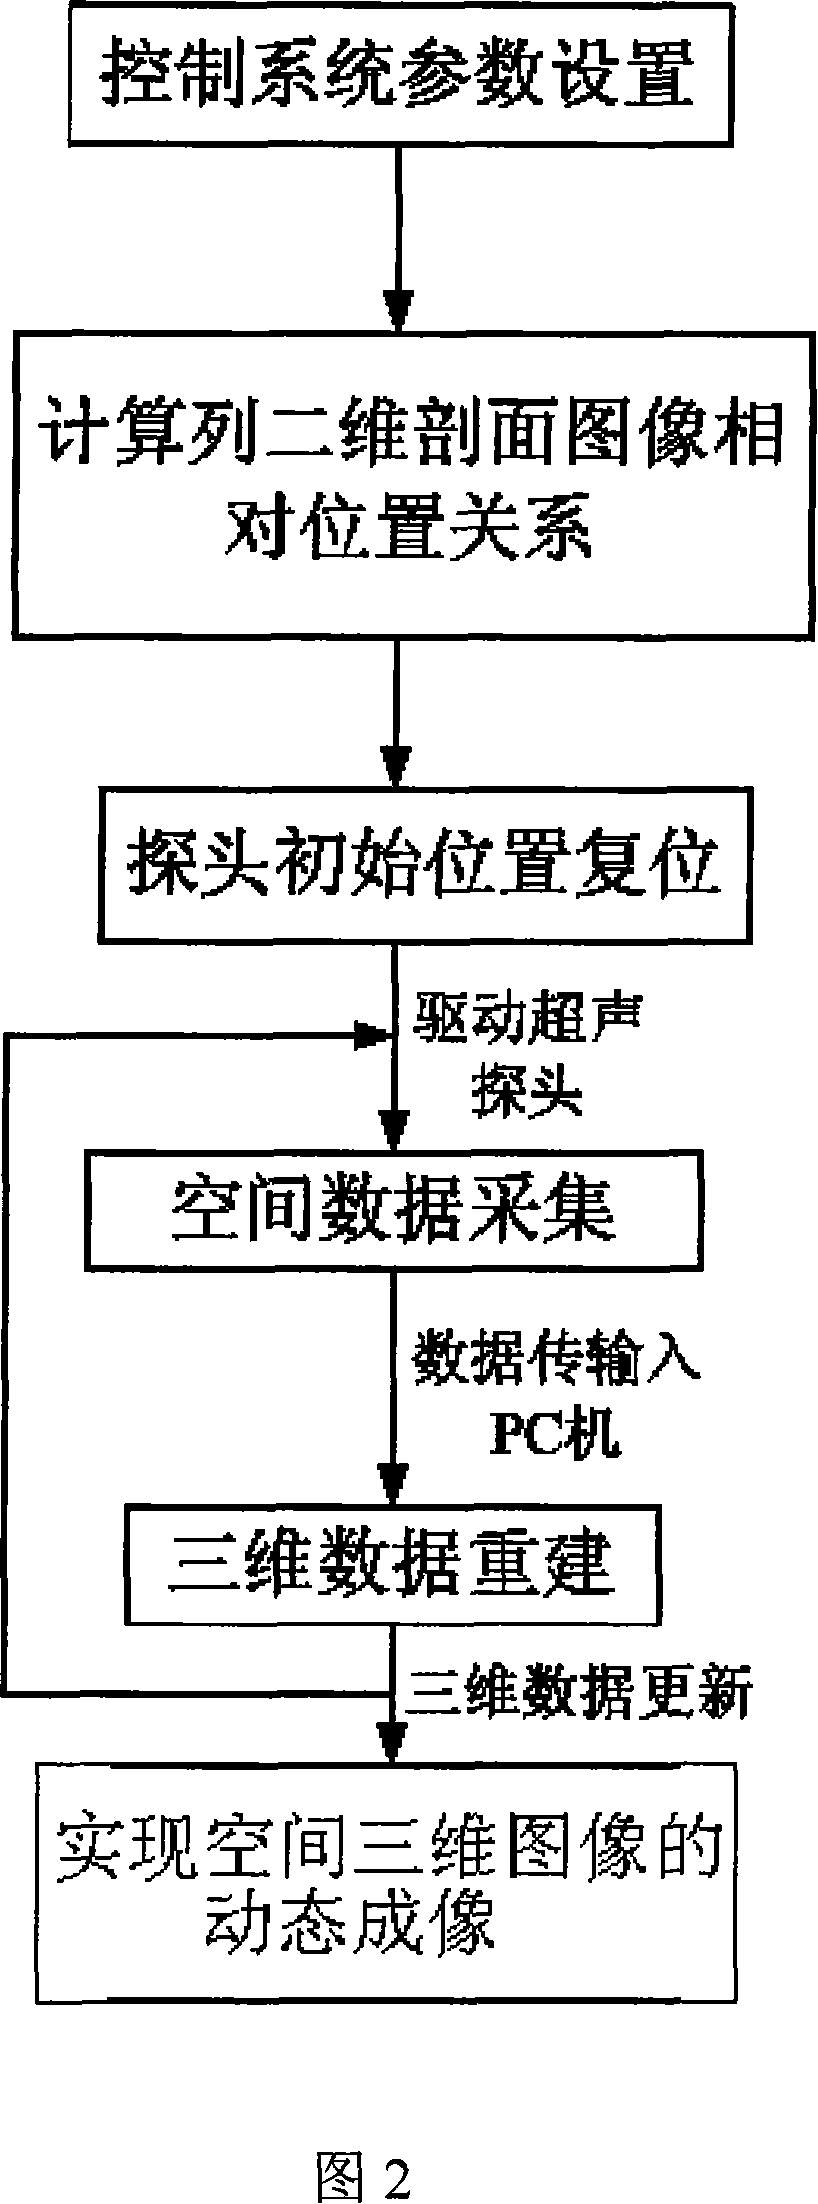 Mechanical scanning realtime three-dimension ultrasonic imaging system and method